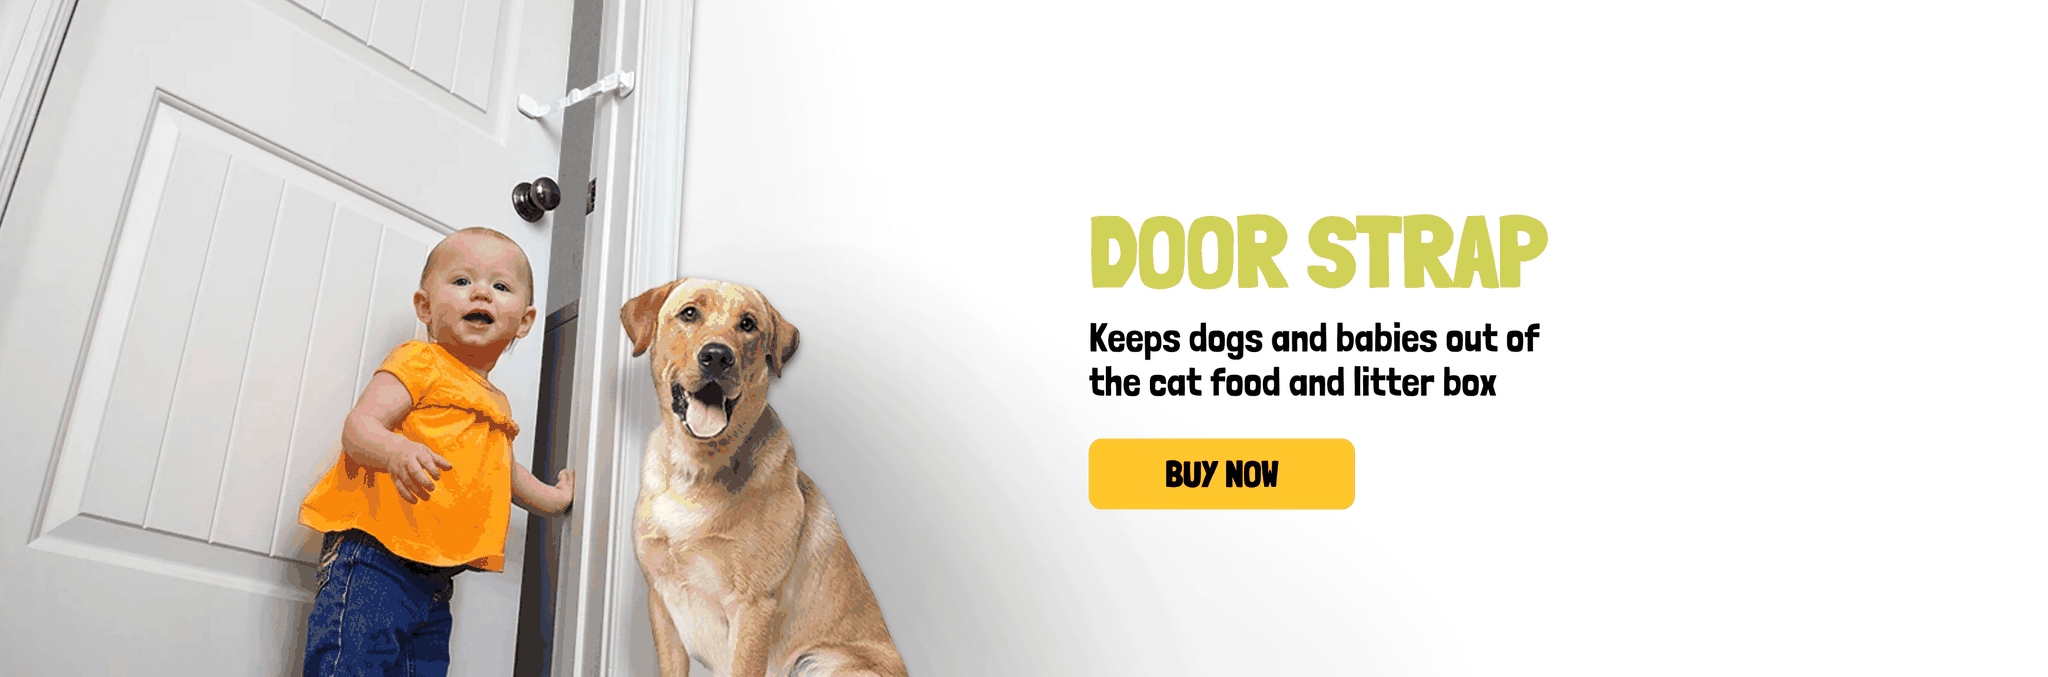 Door Buddy Door Strap Keeps Dogs and Babies out of Cat Food and Litter Box